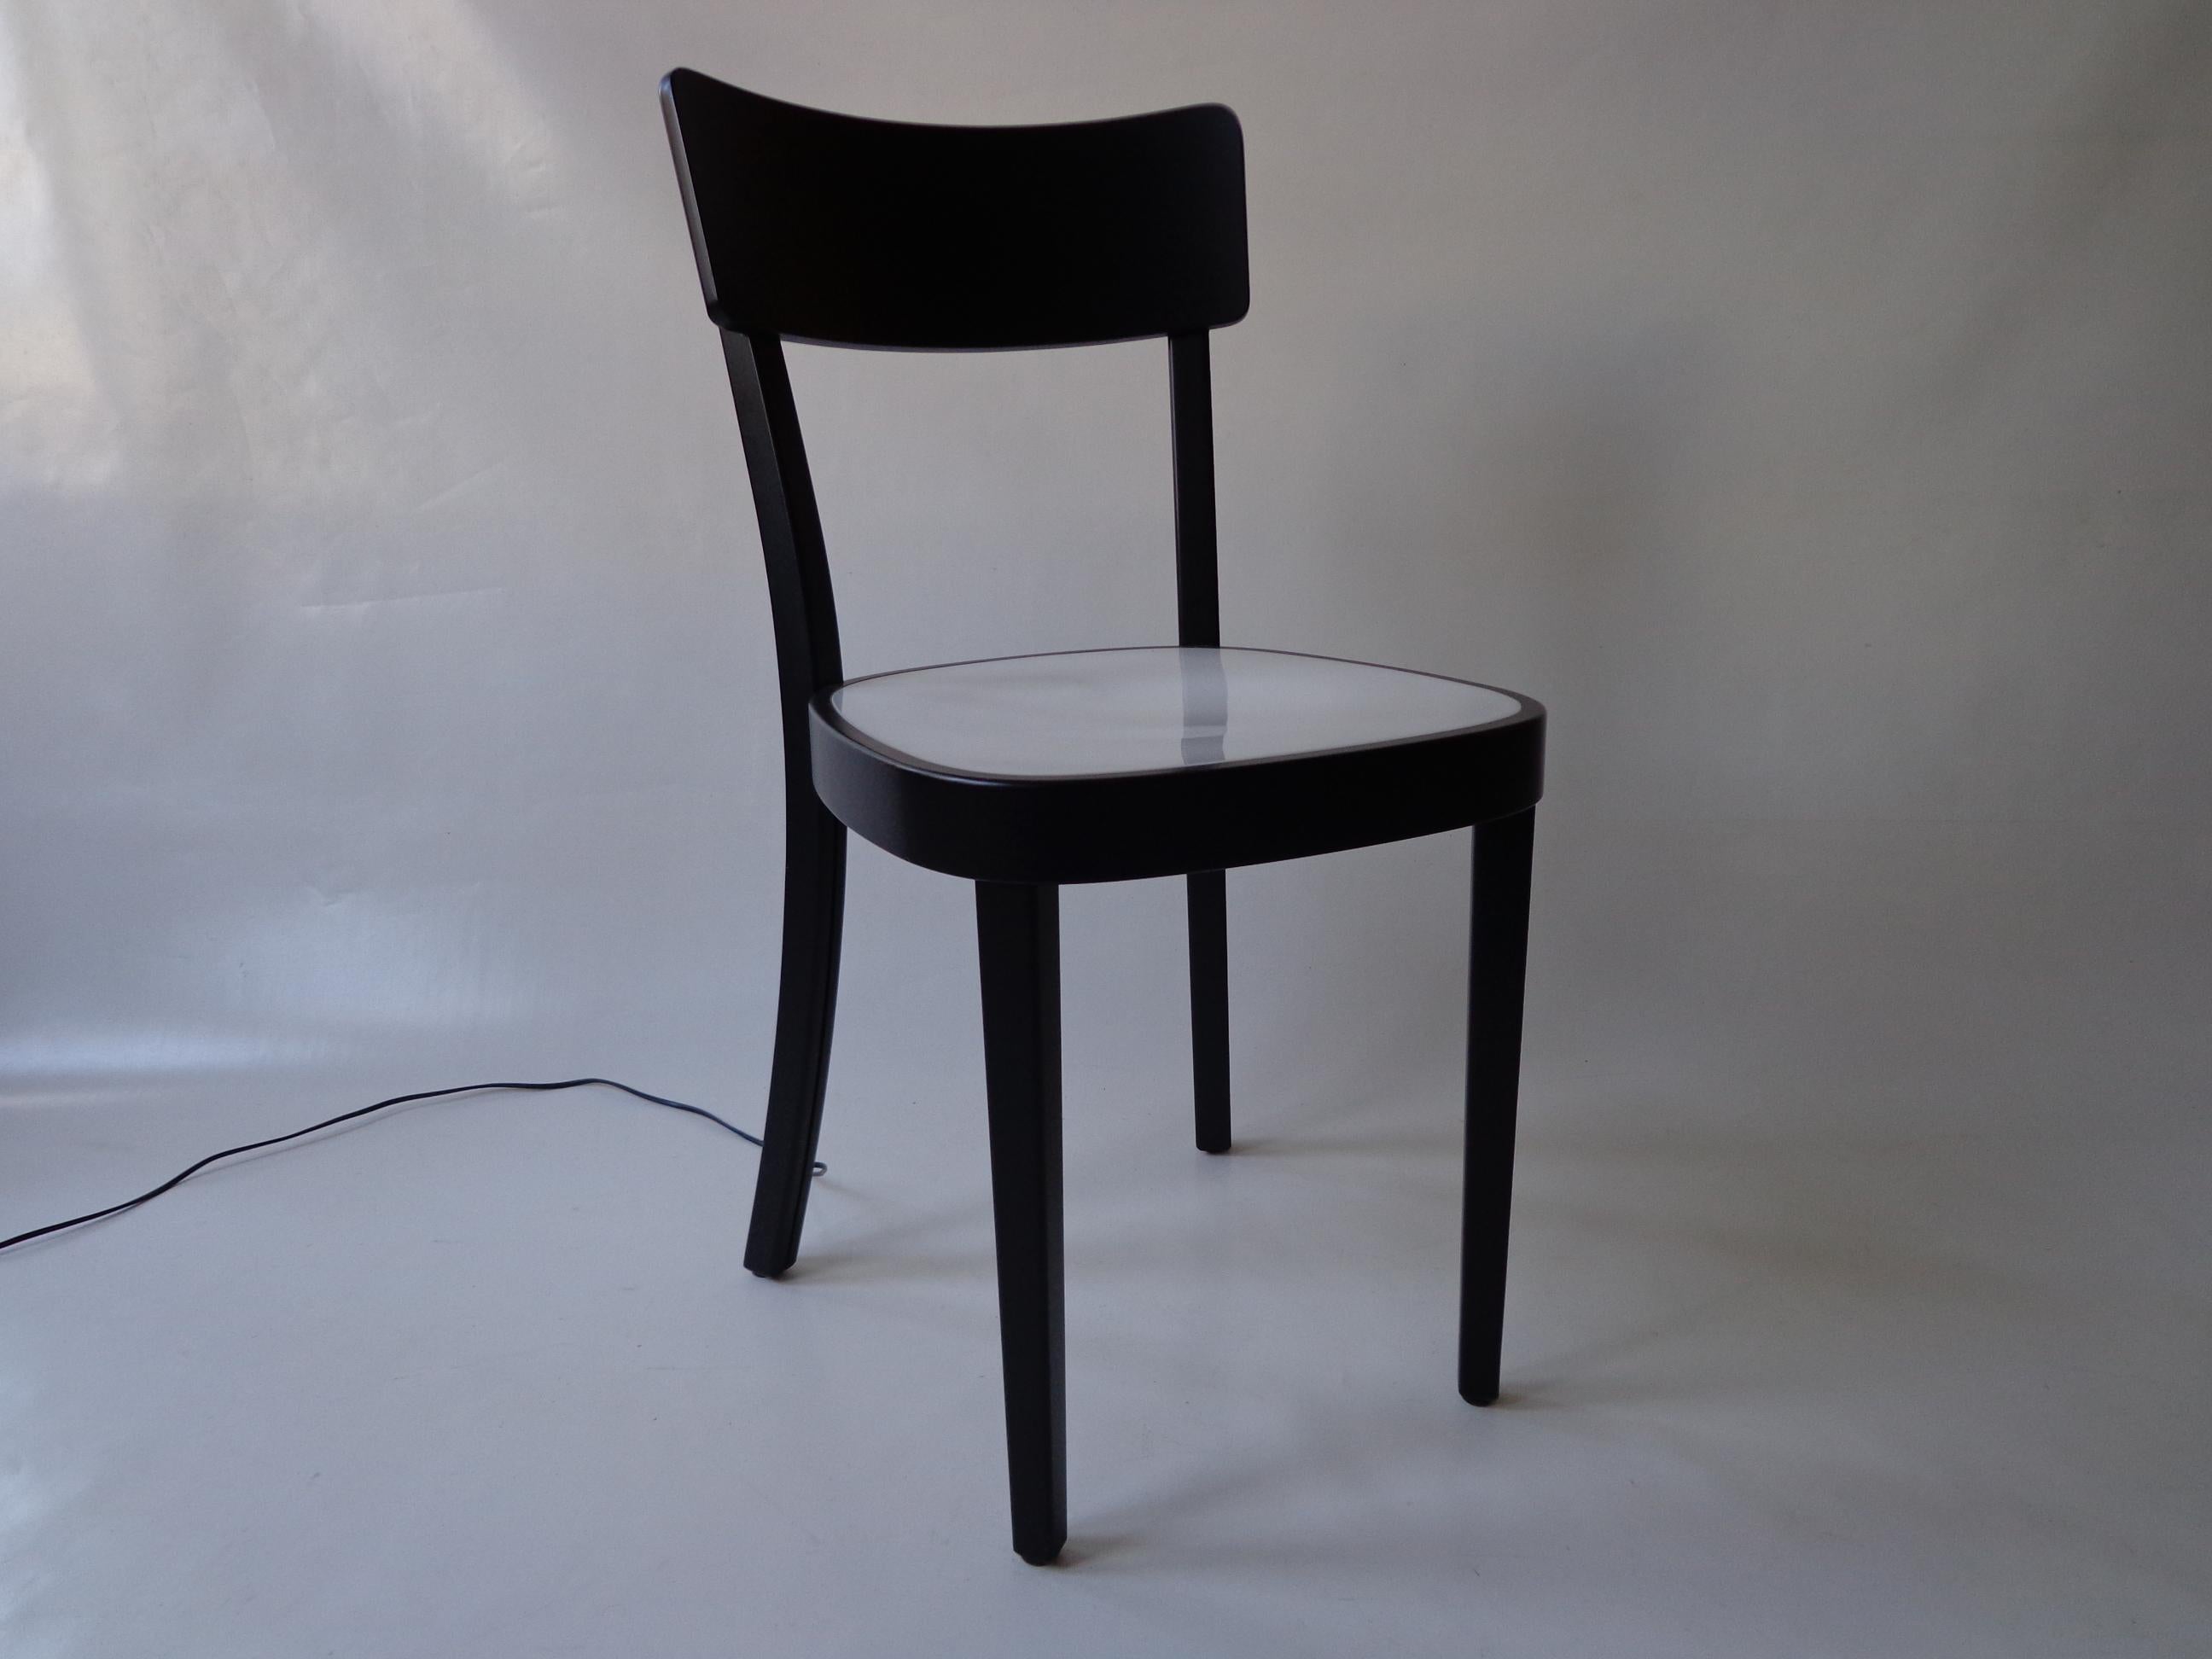 Neon Light Chair in Black-Lacquered Wood from Horgen Glarus for Hidden, 2000s In Good Condition For Sale In Amsterdam, NL